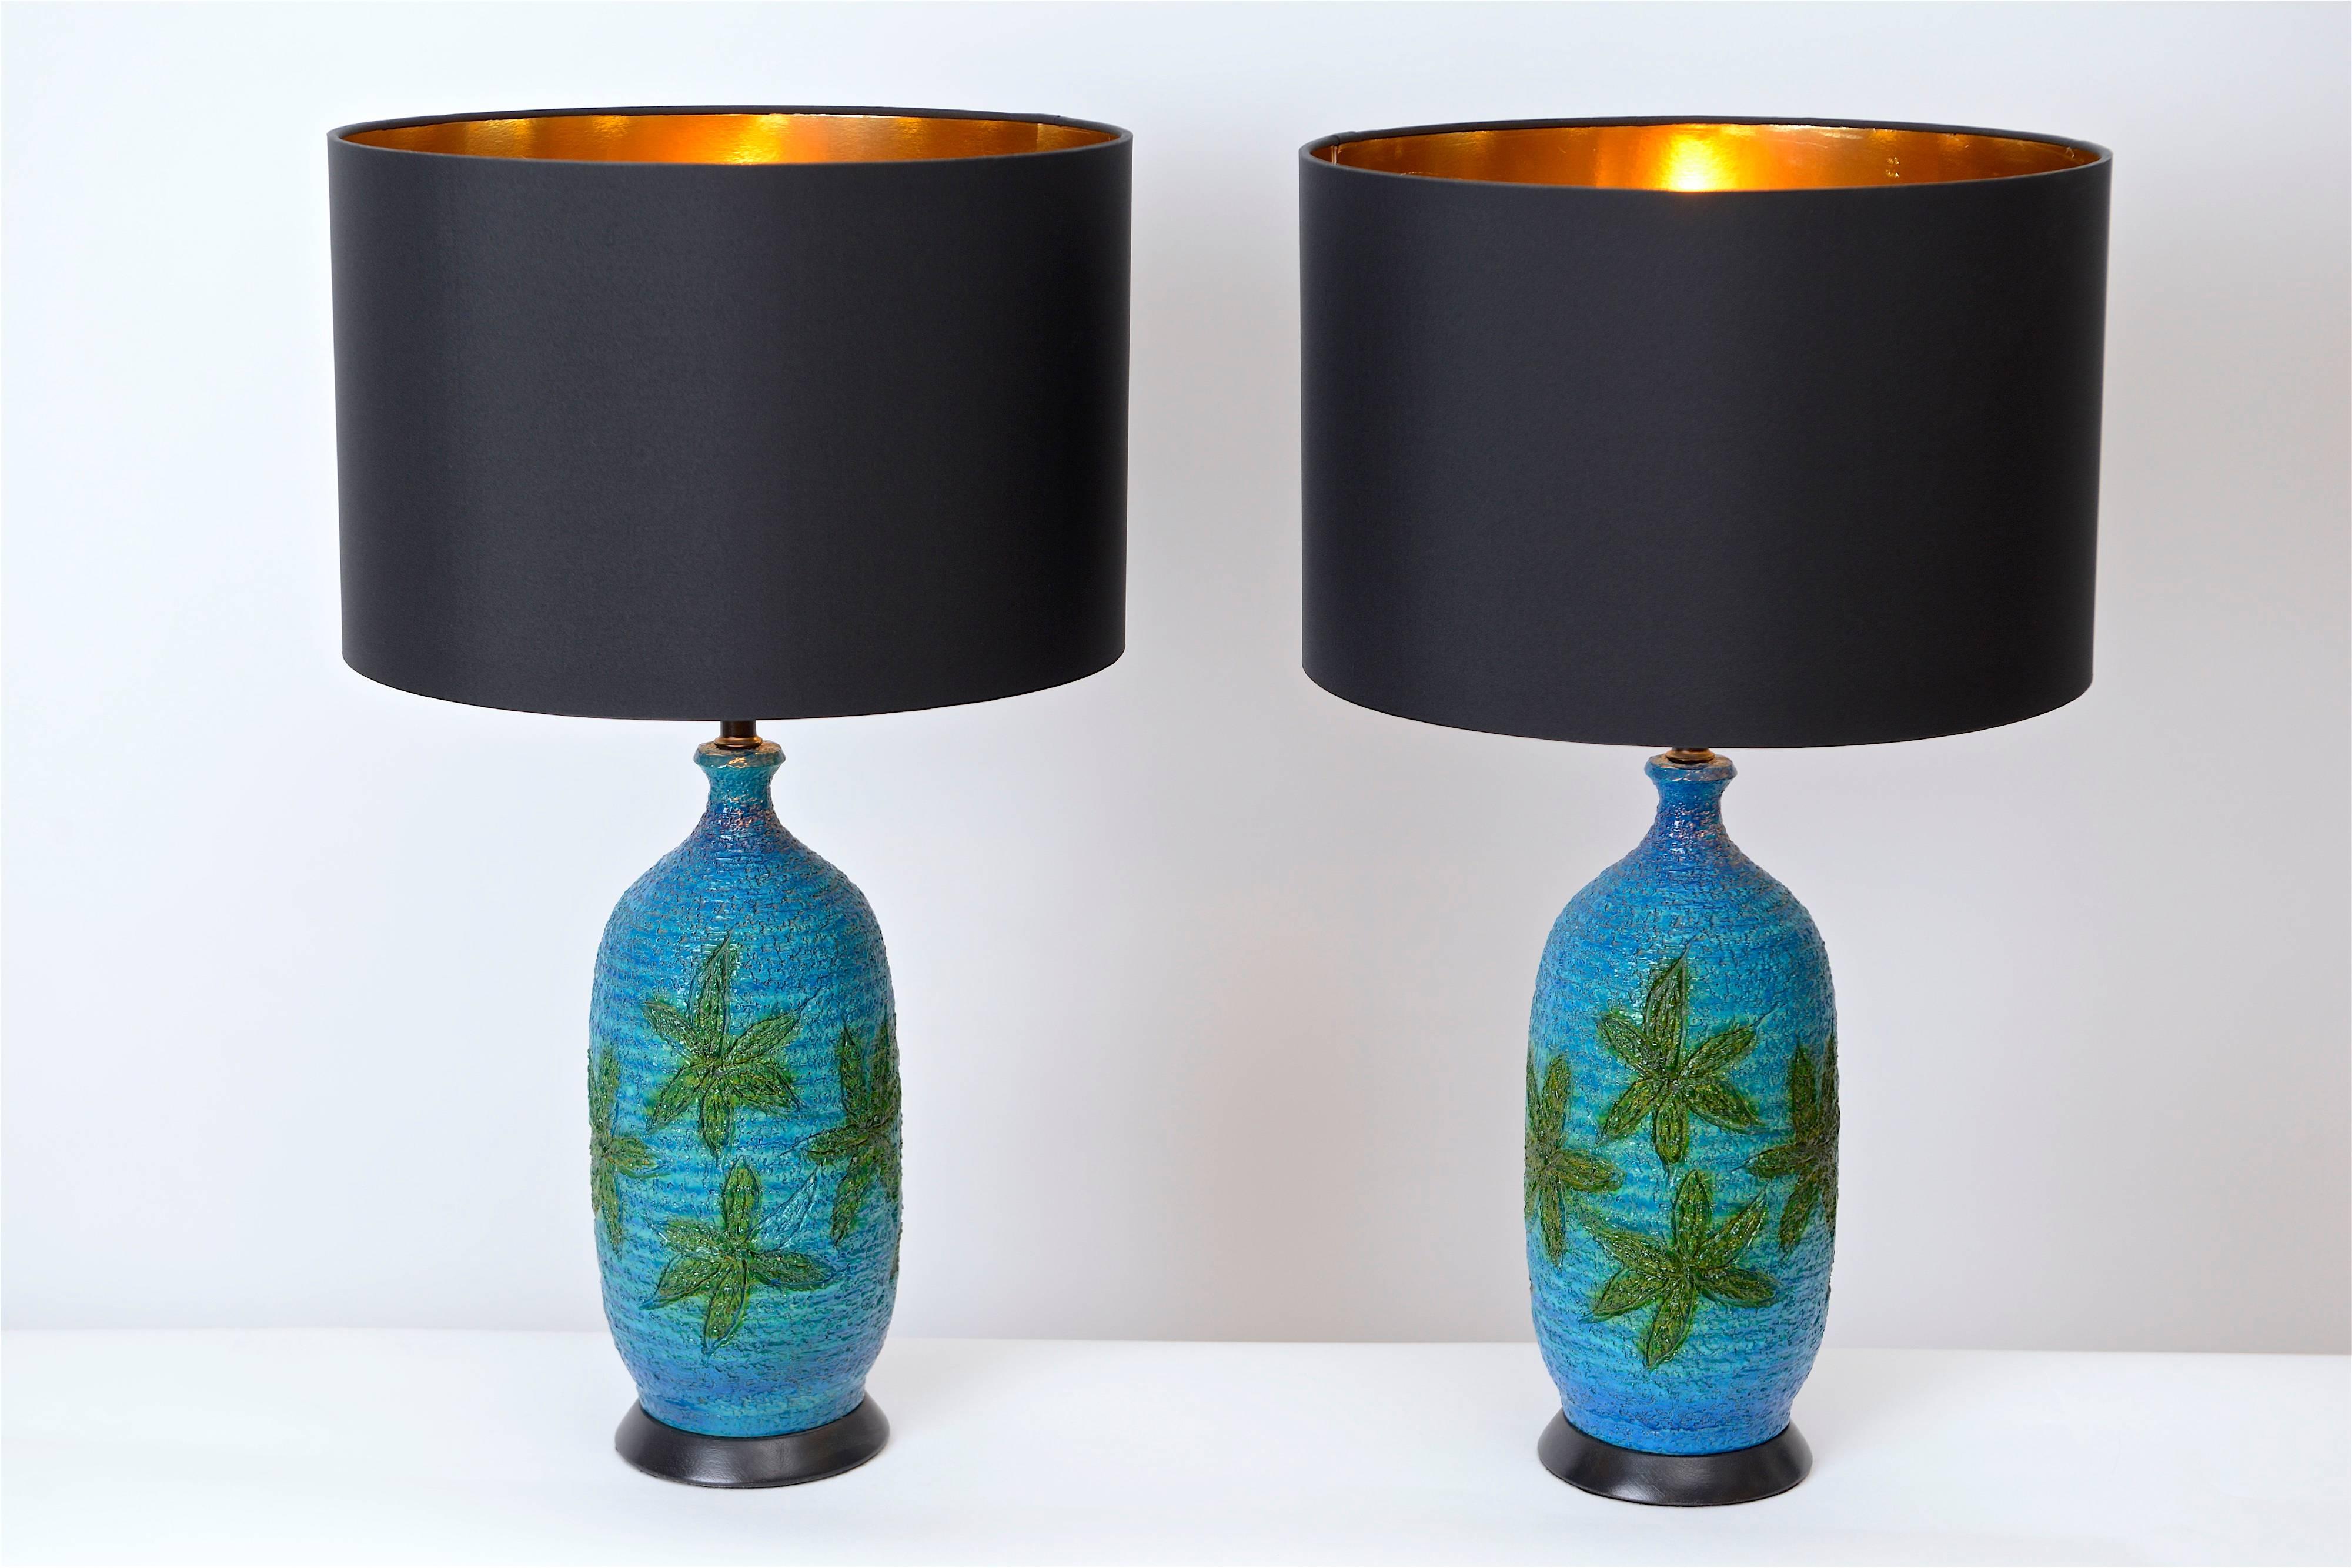 Produced by the New York based company, Quartite Creative Corp., these lamps feature hand-painted, green leaf images on a textured and vivid blue coloured background. Similar to the Bitossi production in Italy, these lamps have a great vintage feel